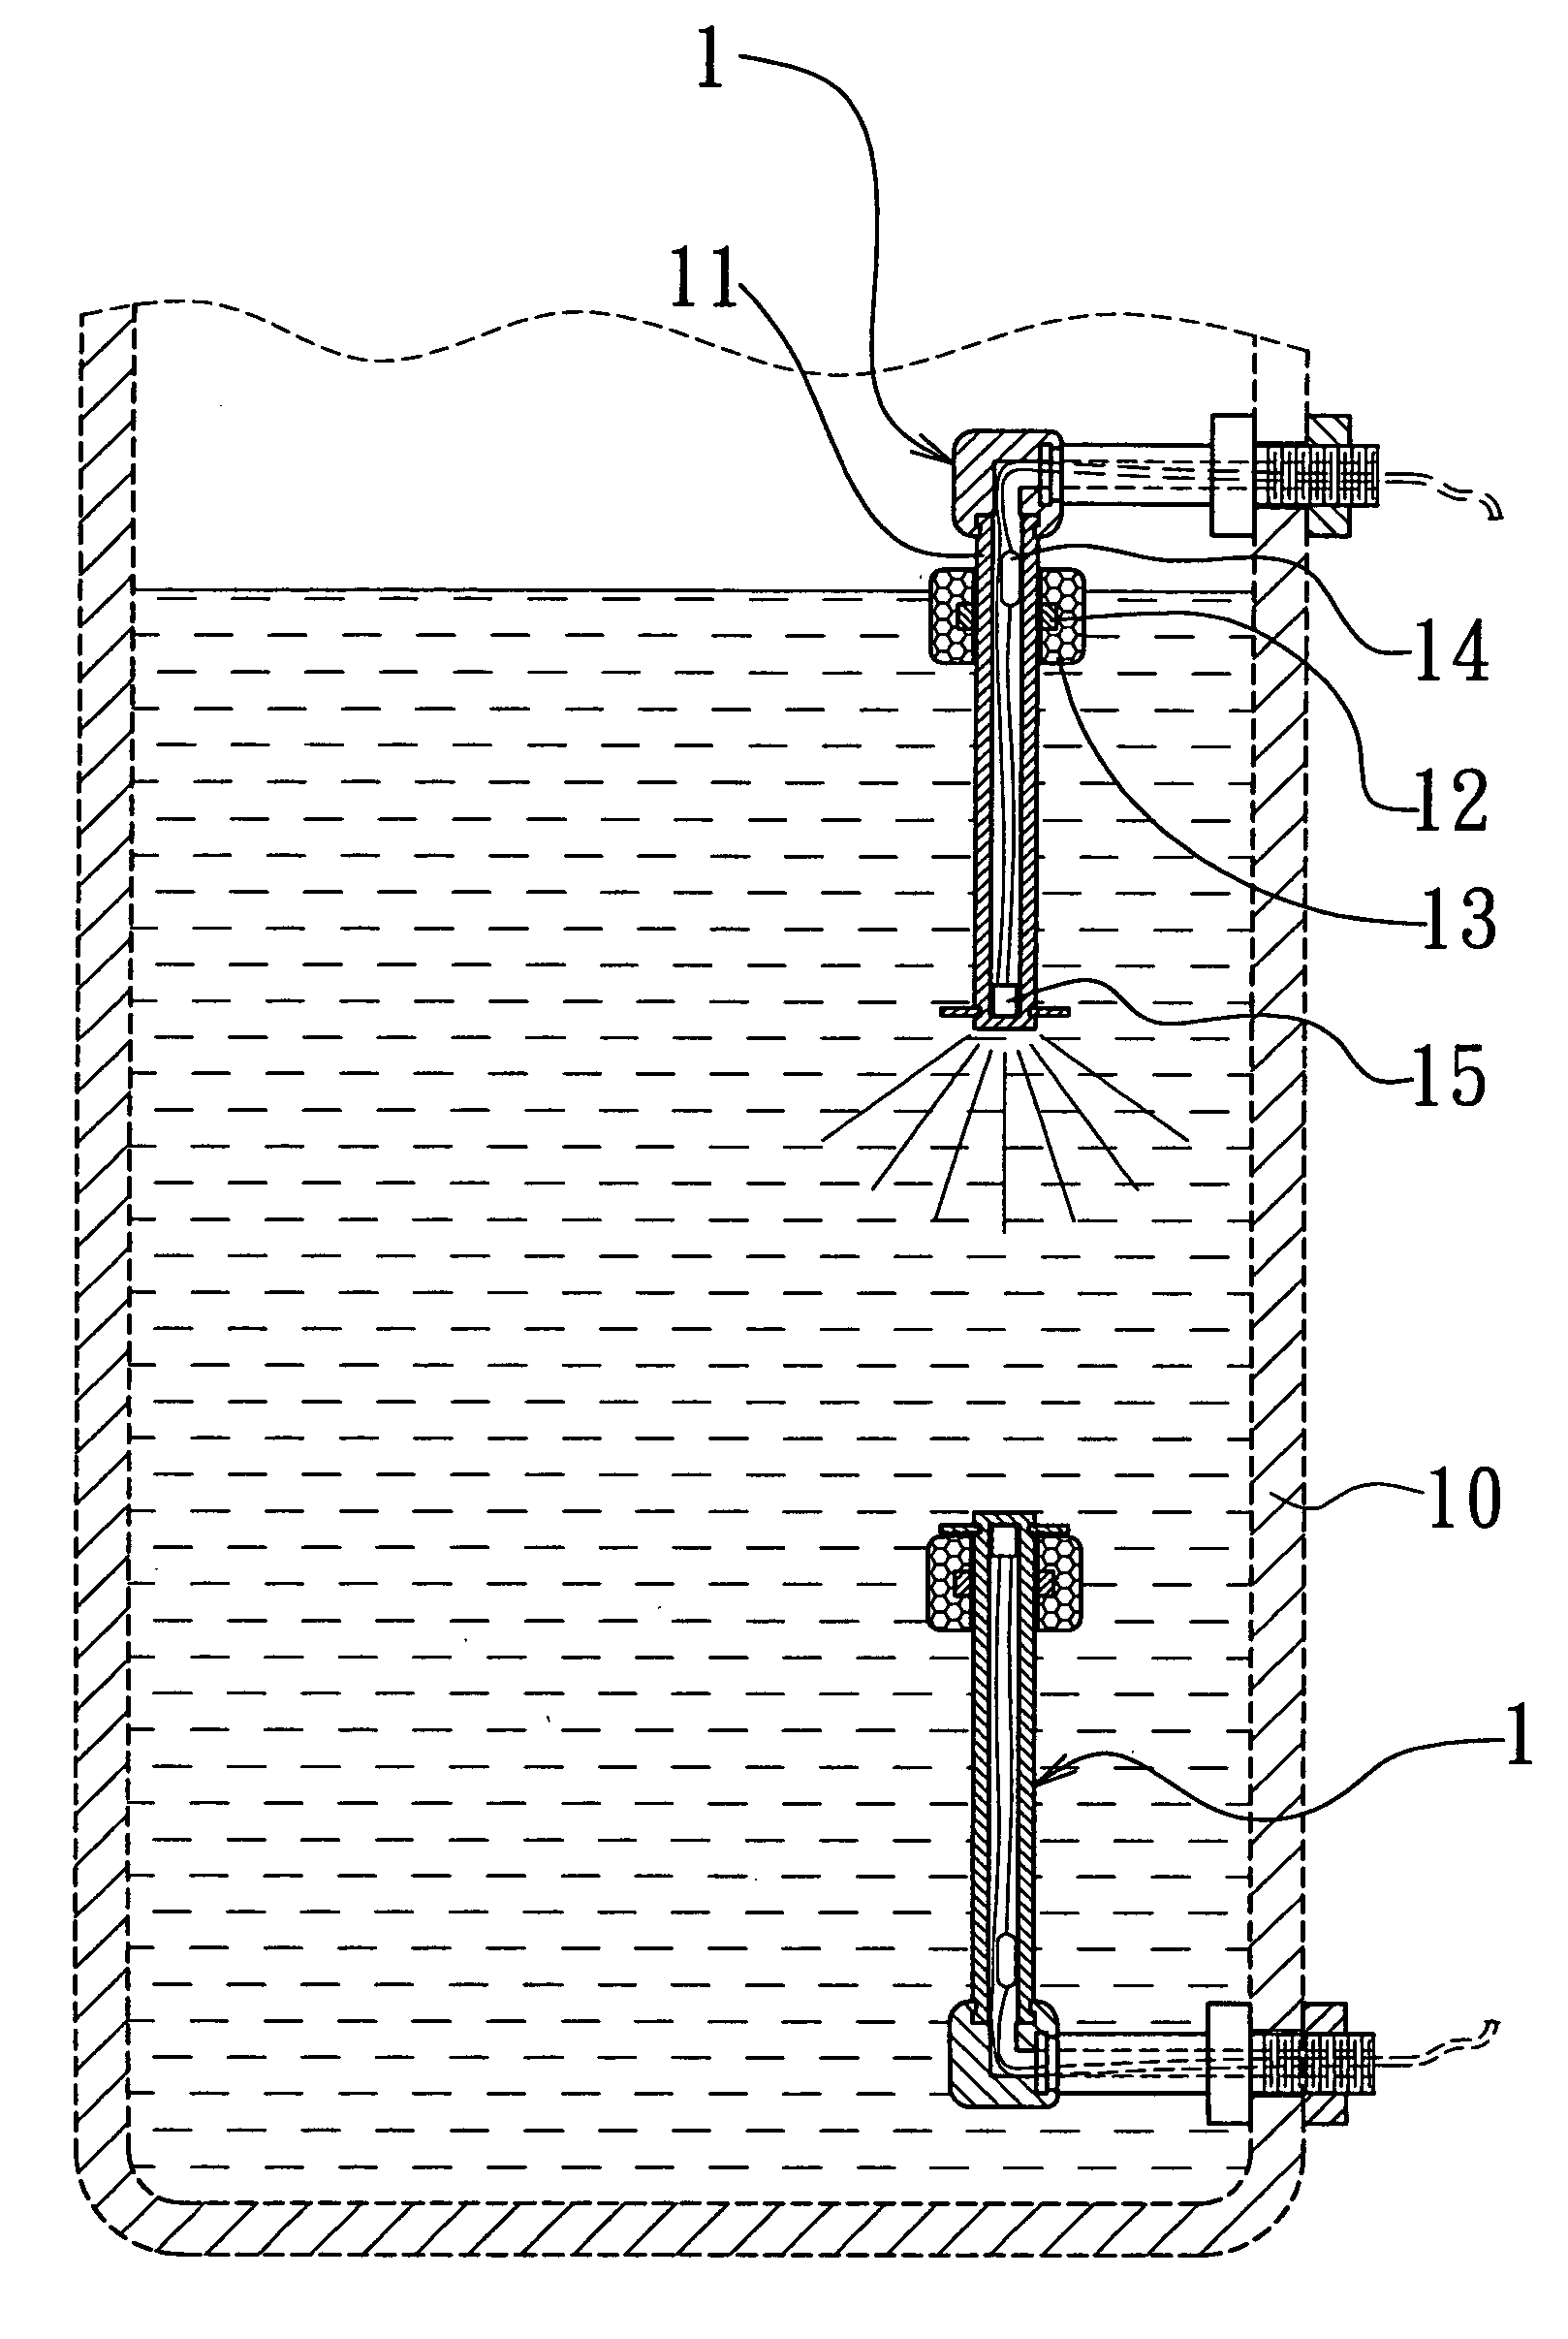 Float-type liquid level switch assembly with light emitting elements